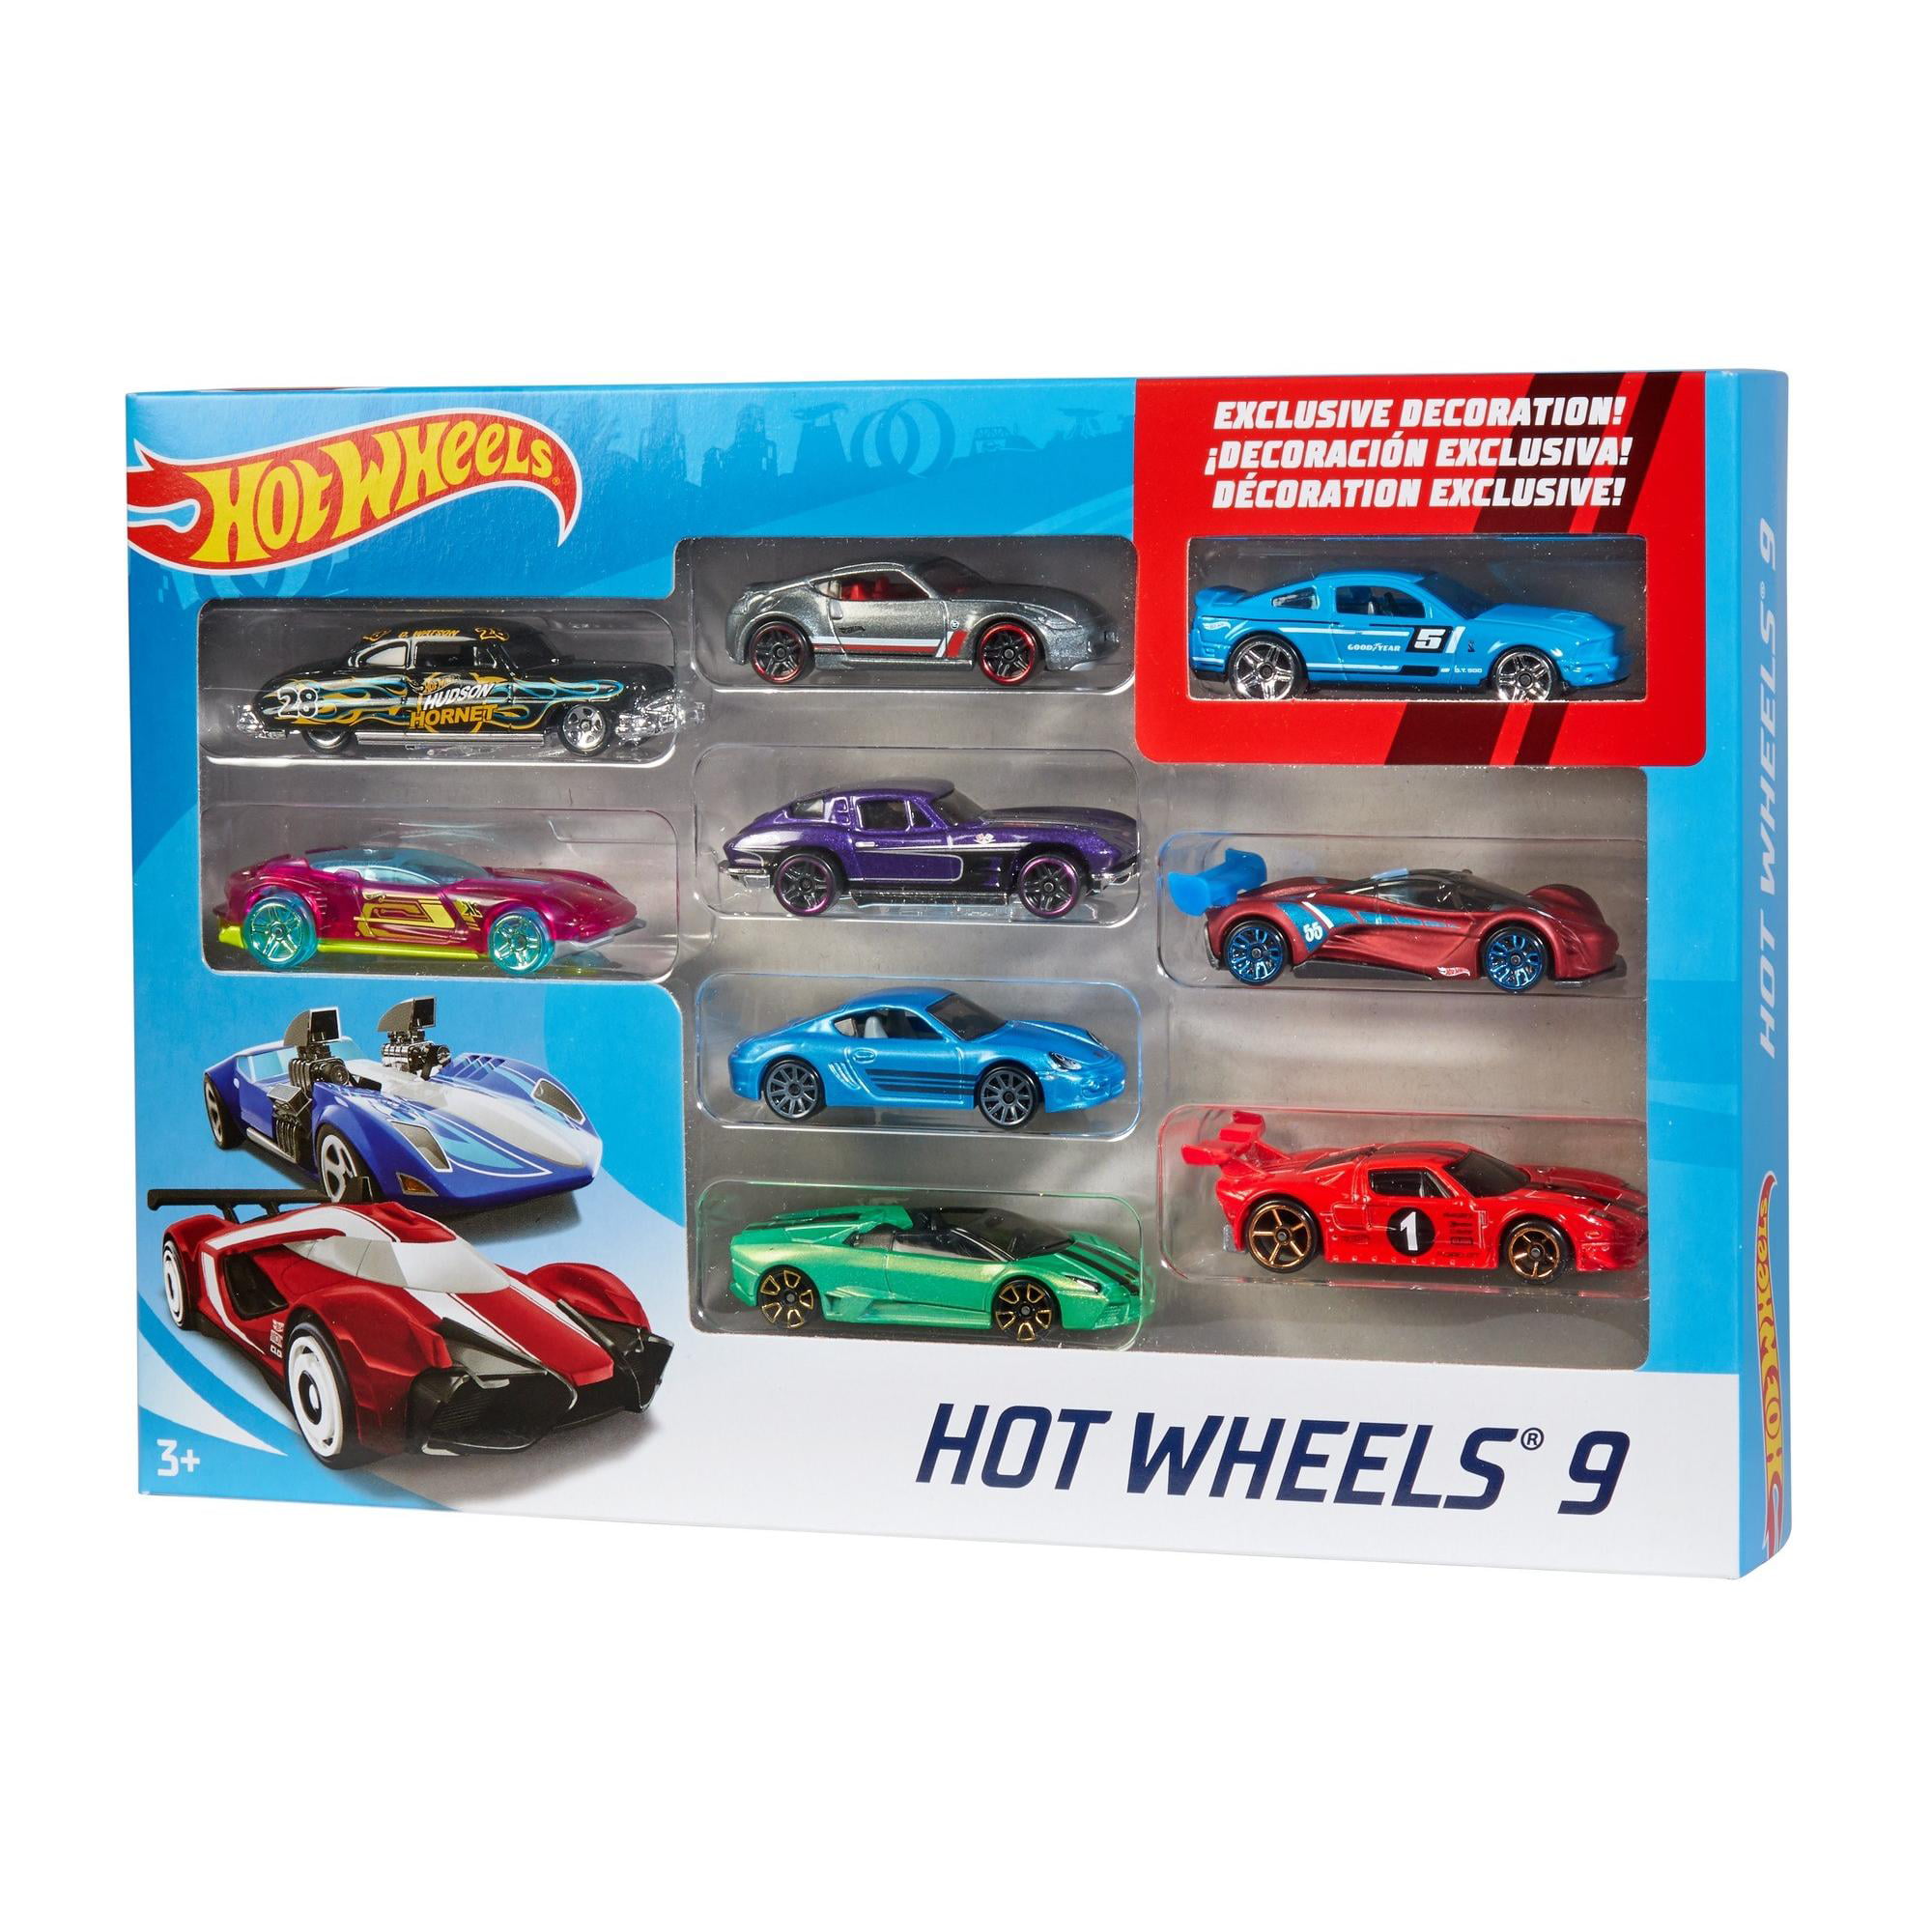 Hotwheels 5 Pack Mini Cooper USA only never sold in single blisters NICE